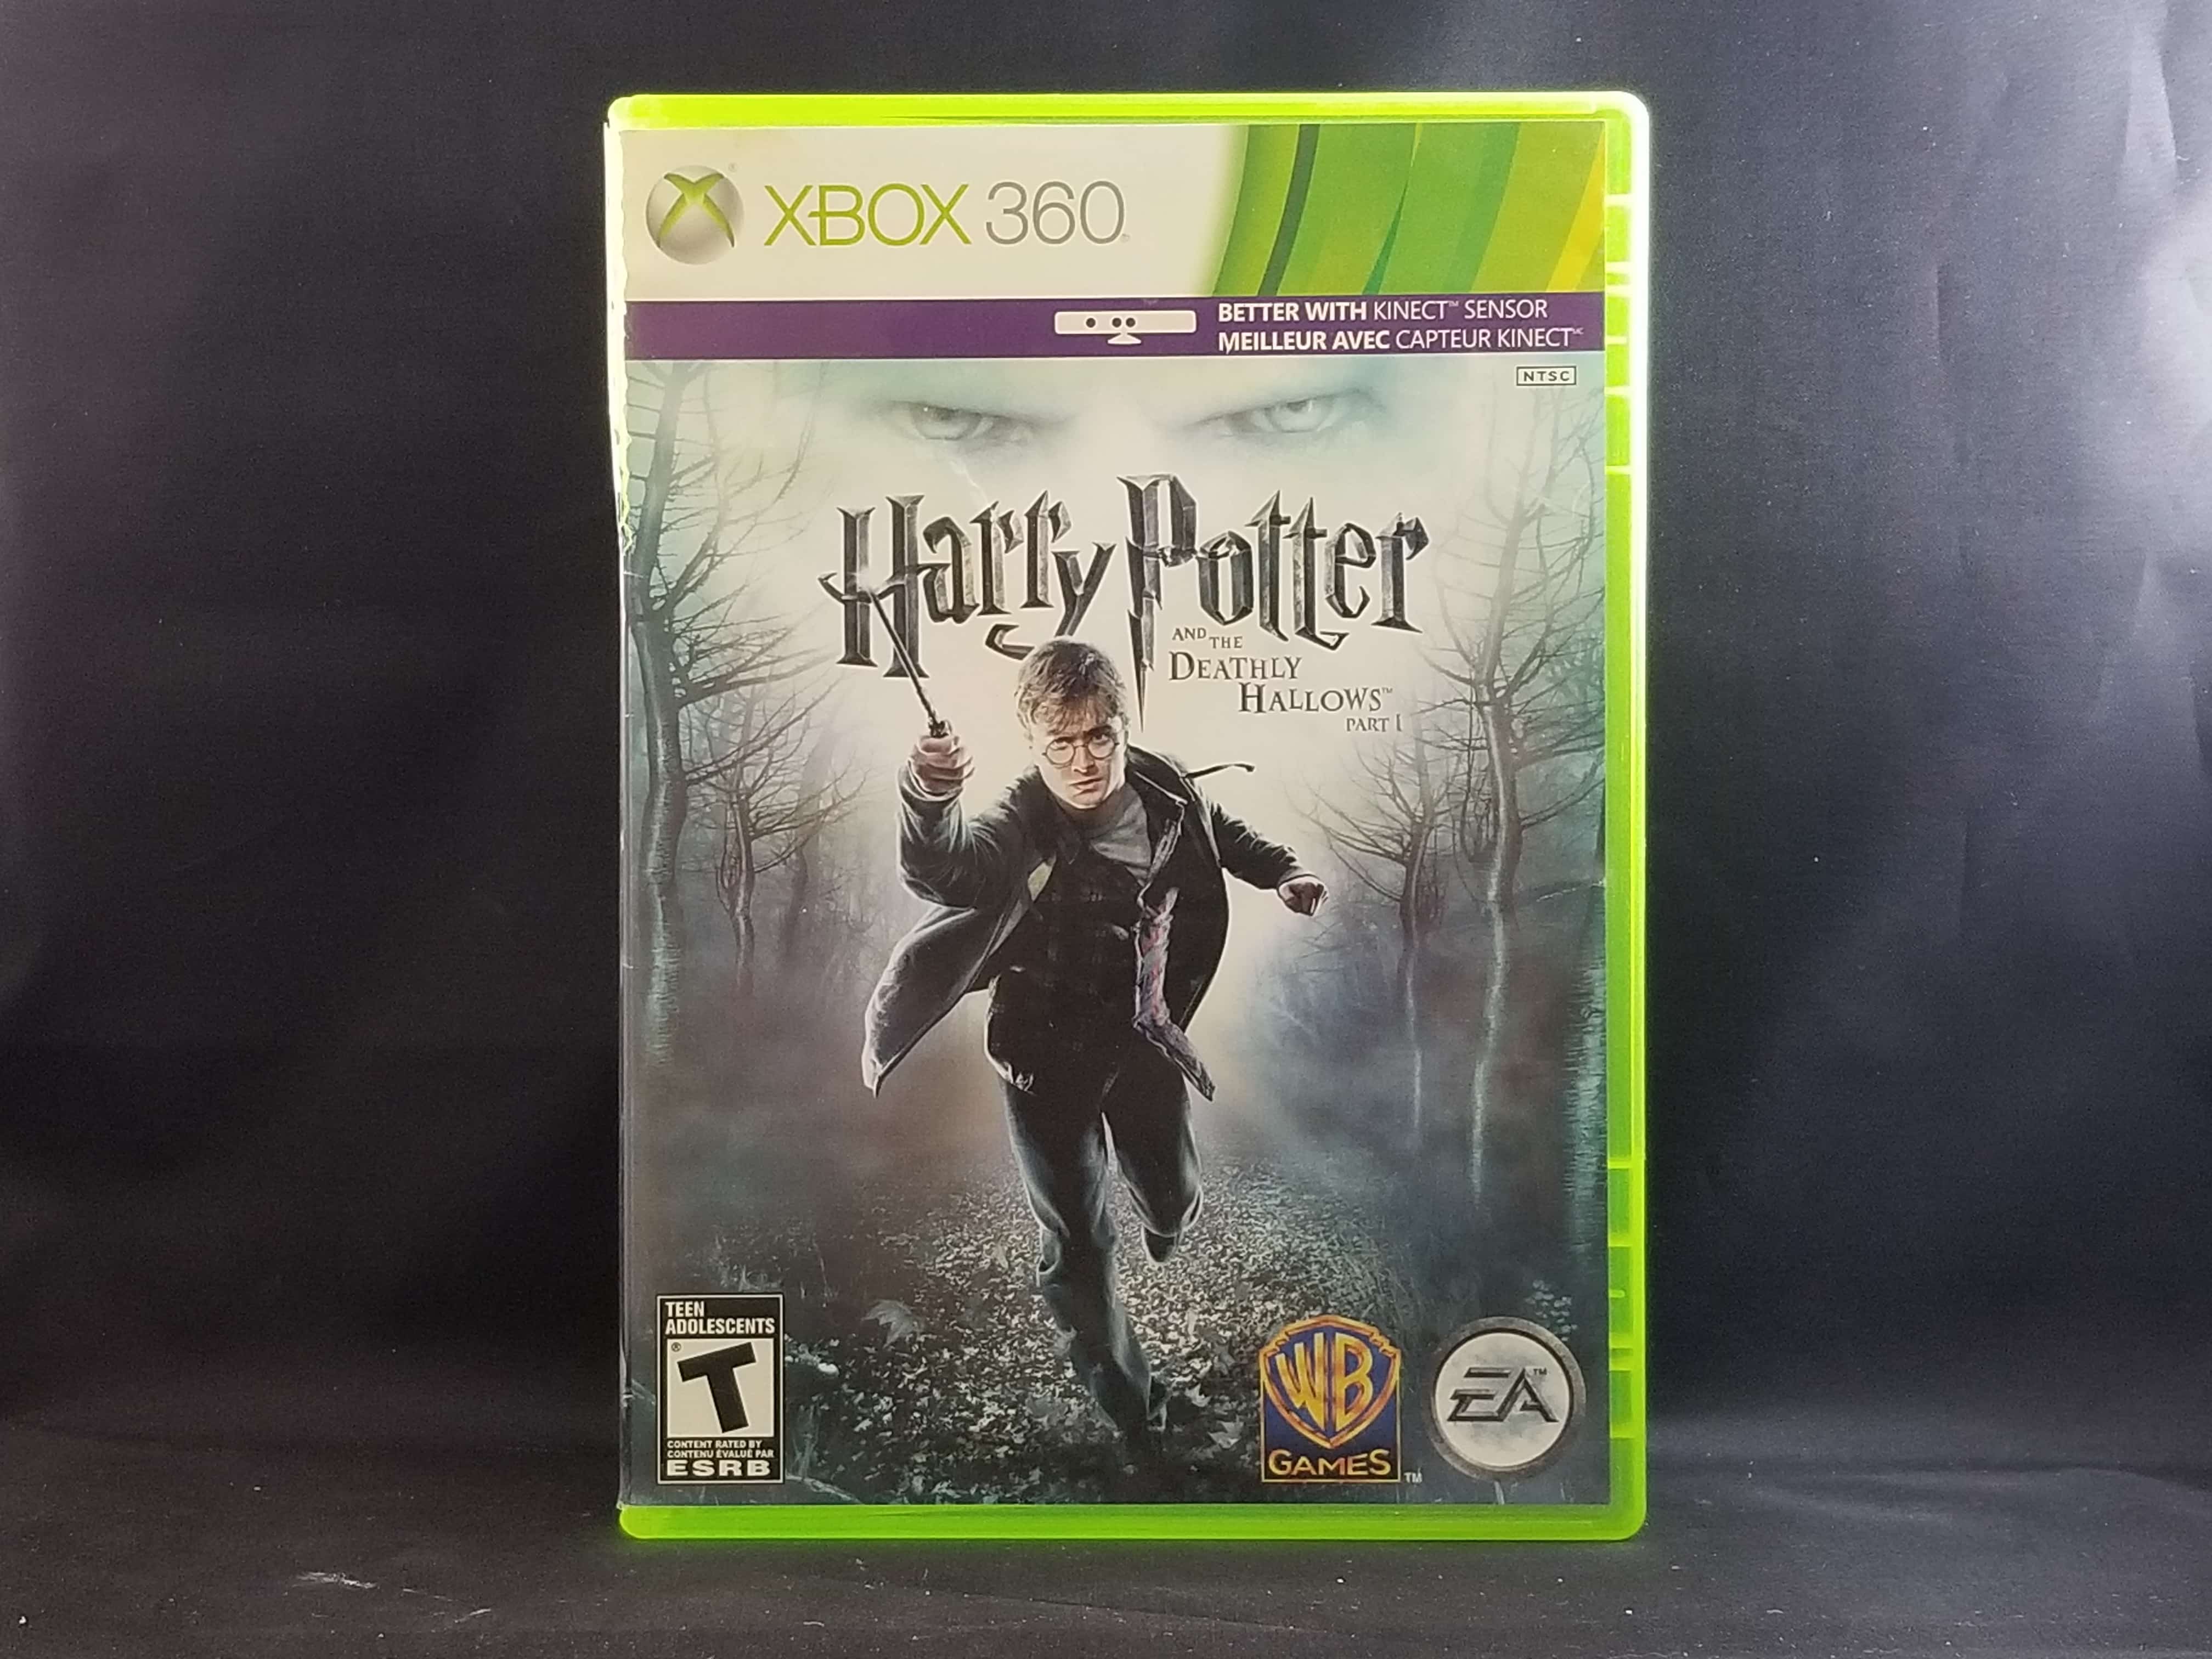 Harry Potter and the Deathly Hallows - Part 1: The Videogame - Xbox 360, Xbox 360